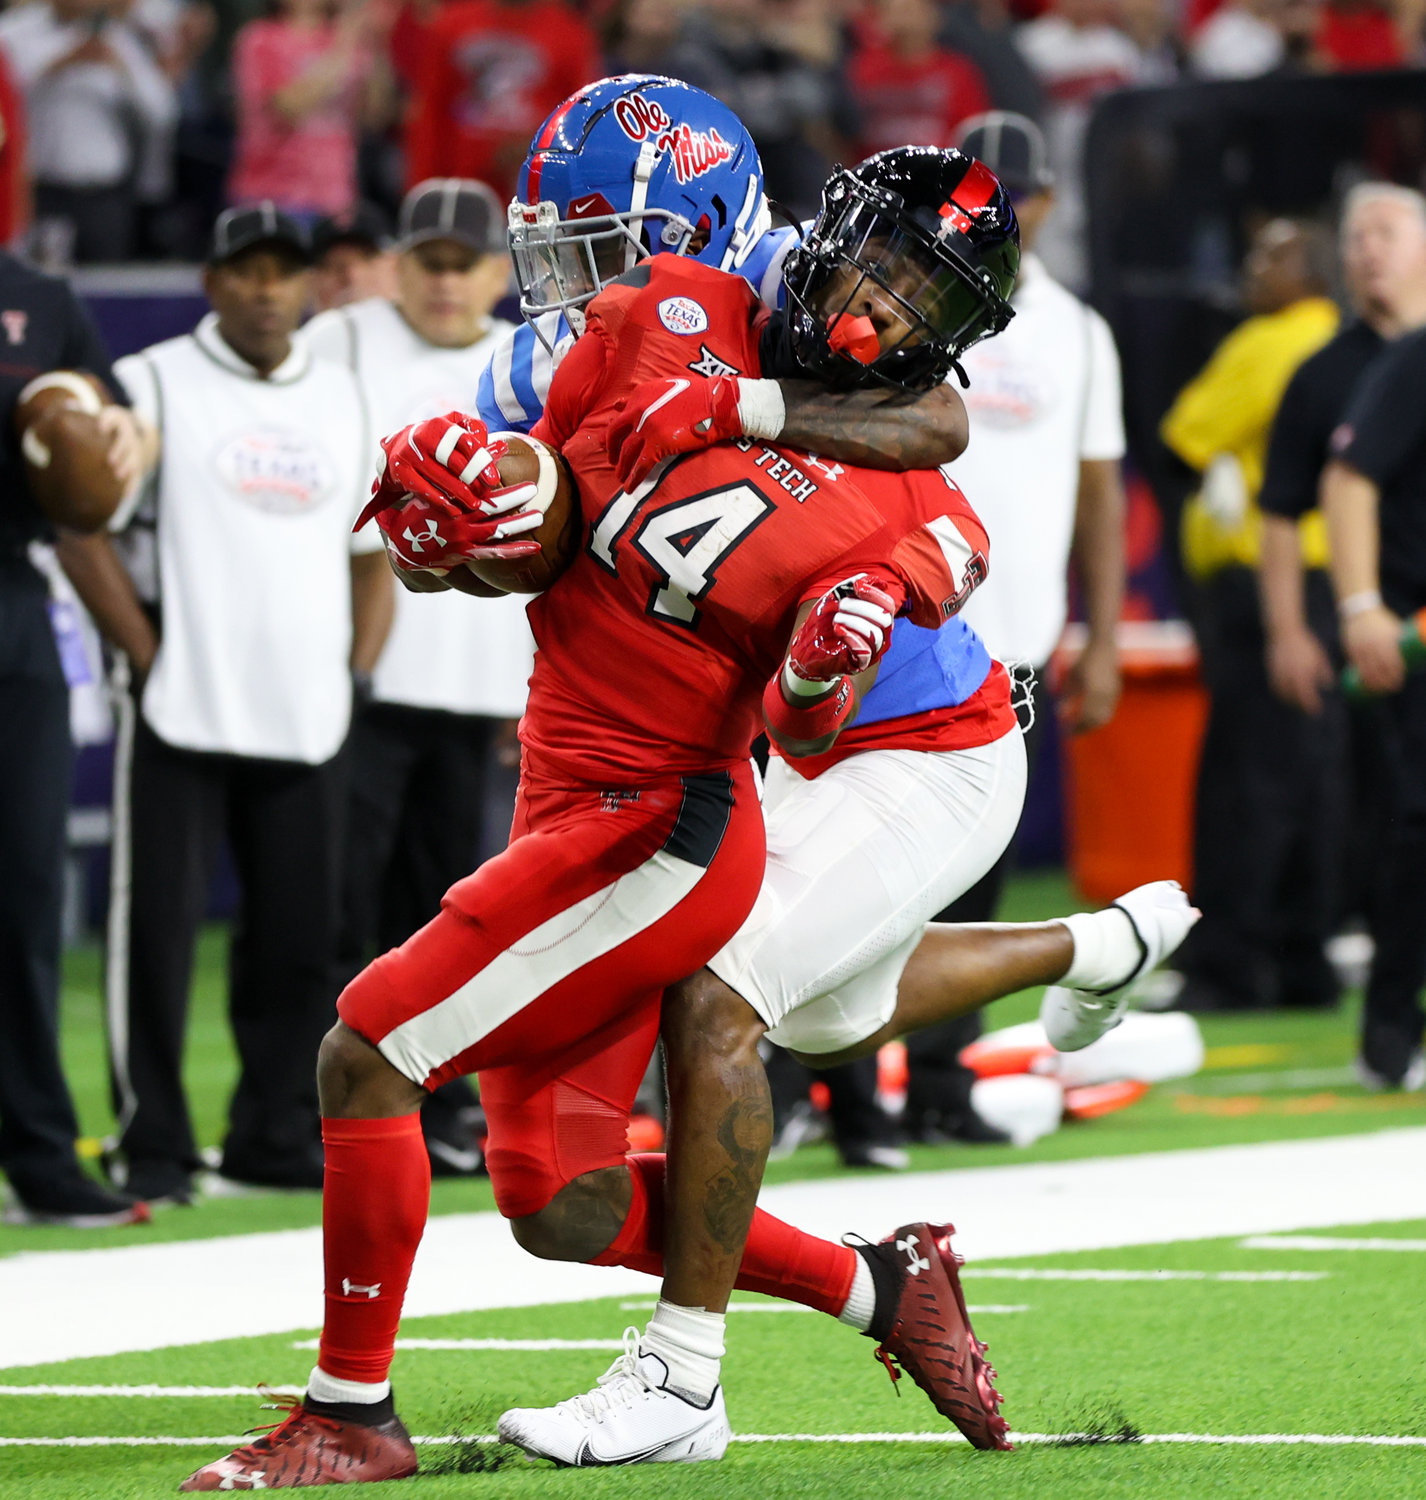 Texas Tech wide receiver Xavier White (14) is tackled on a carry during the TaxAct Texas Bowl on Dec. 28, 2022 in Houston.